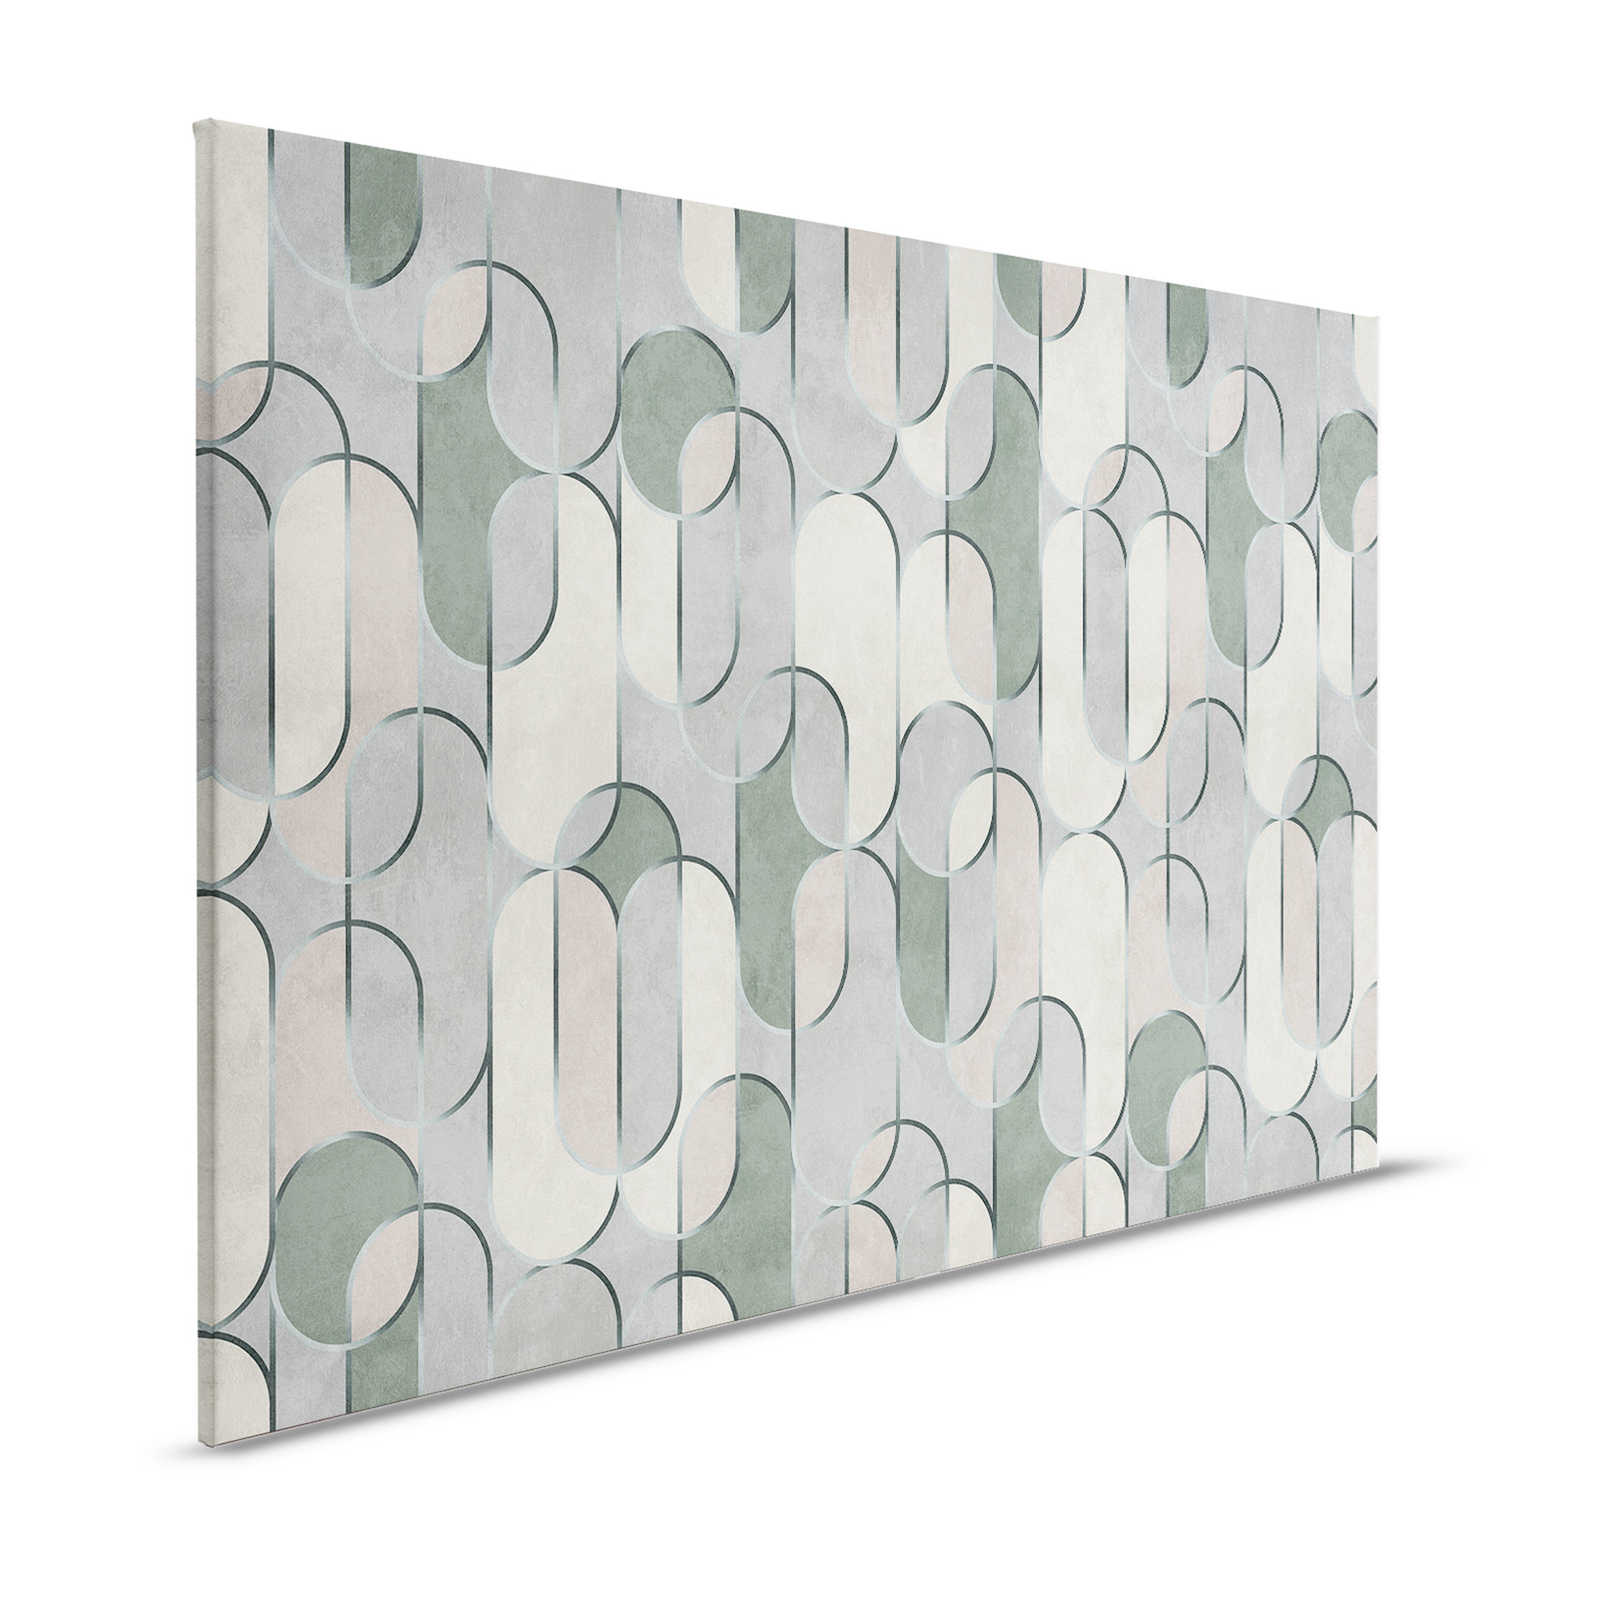 Ritz 2 - Canvas painting Retro Style, Grey & Green with Metallic Details - 1.20 m x 0.80 m
